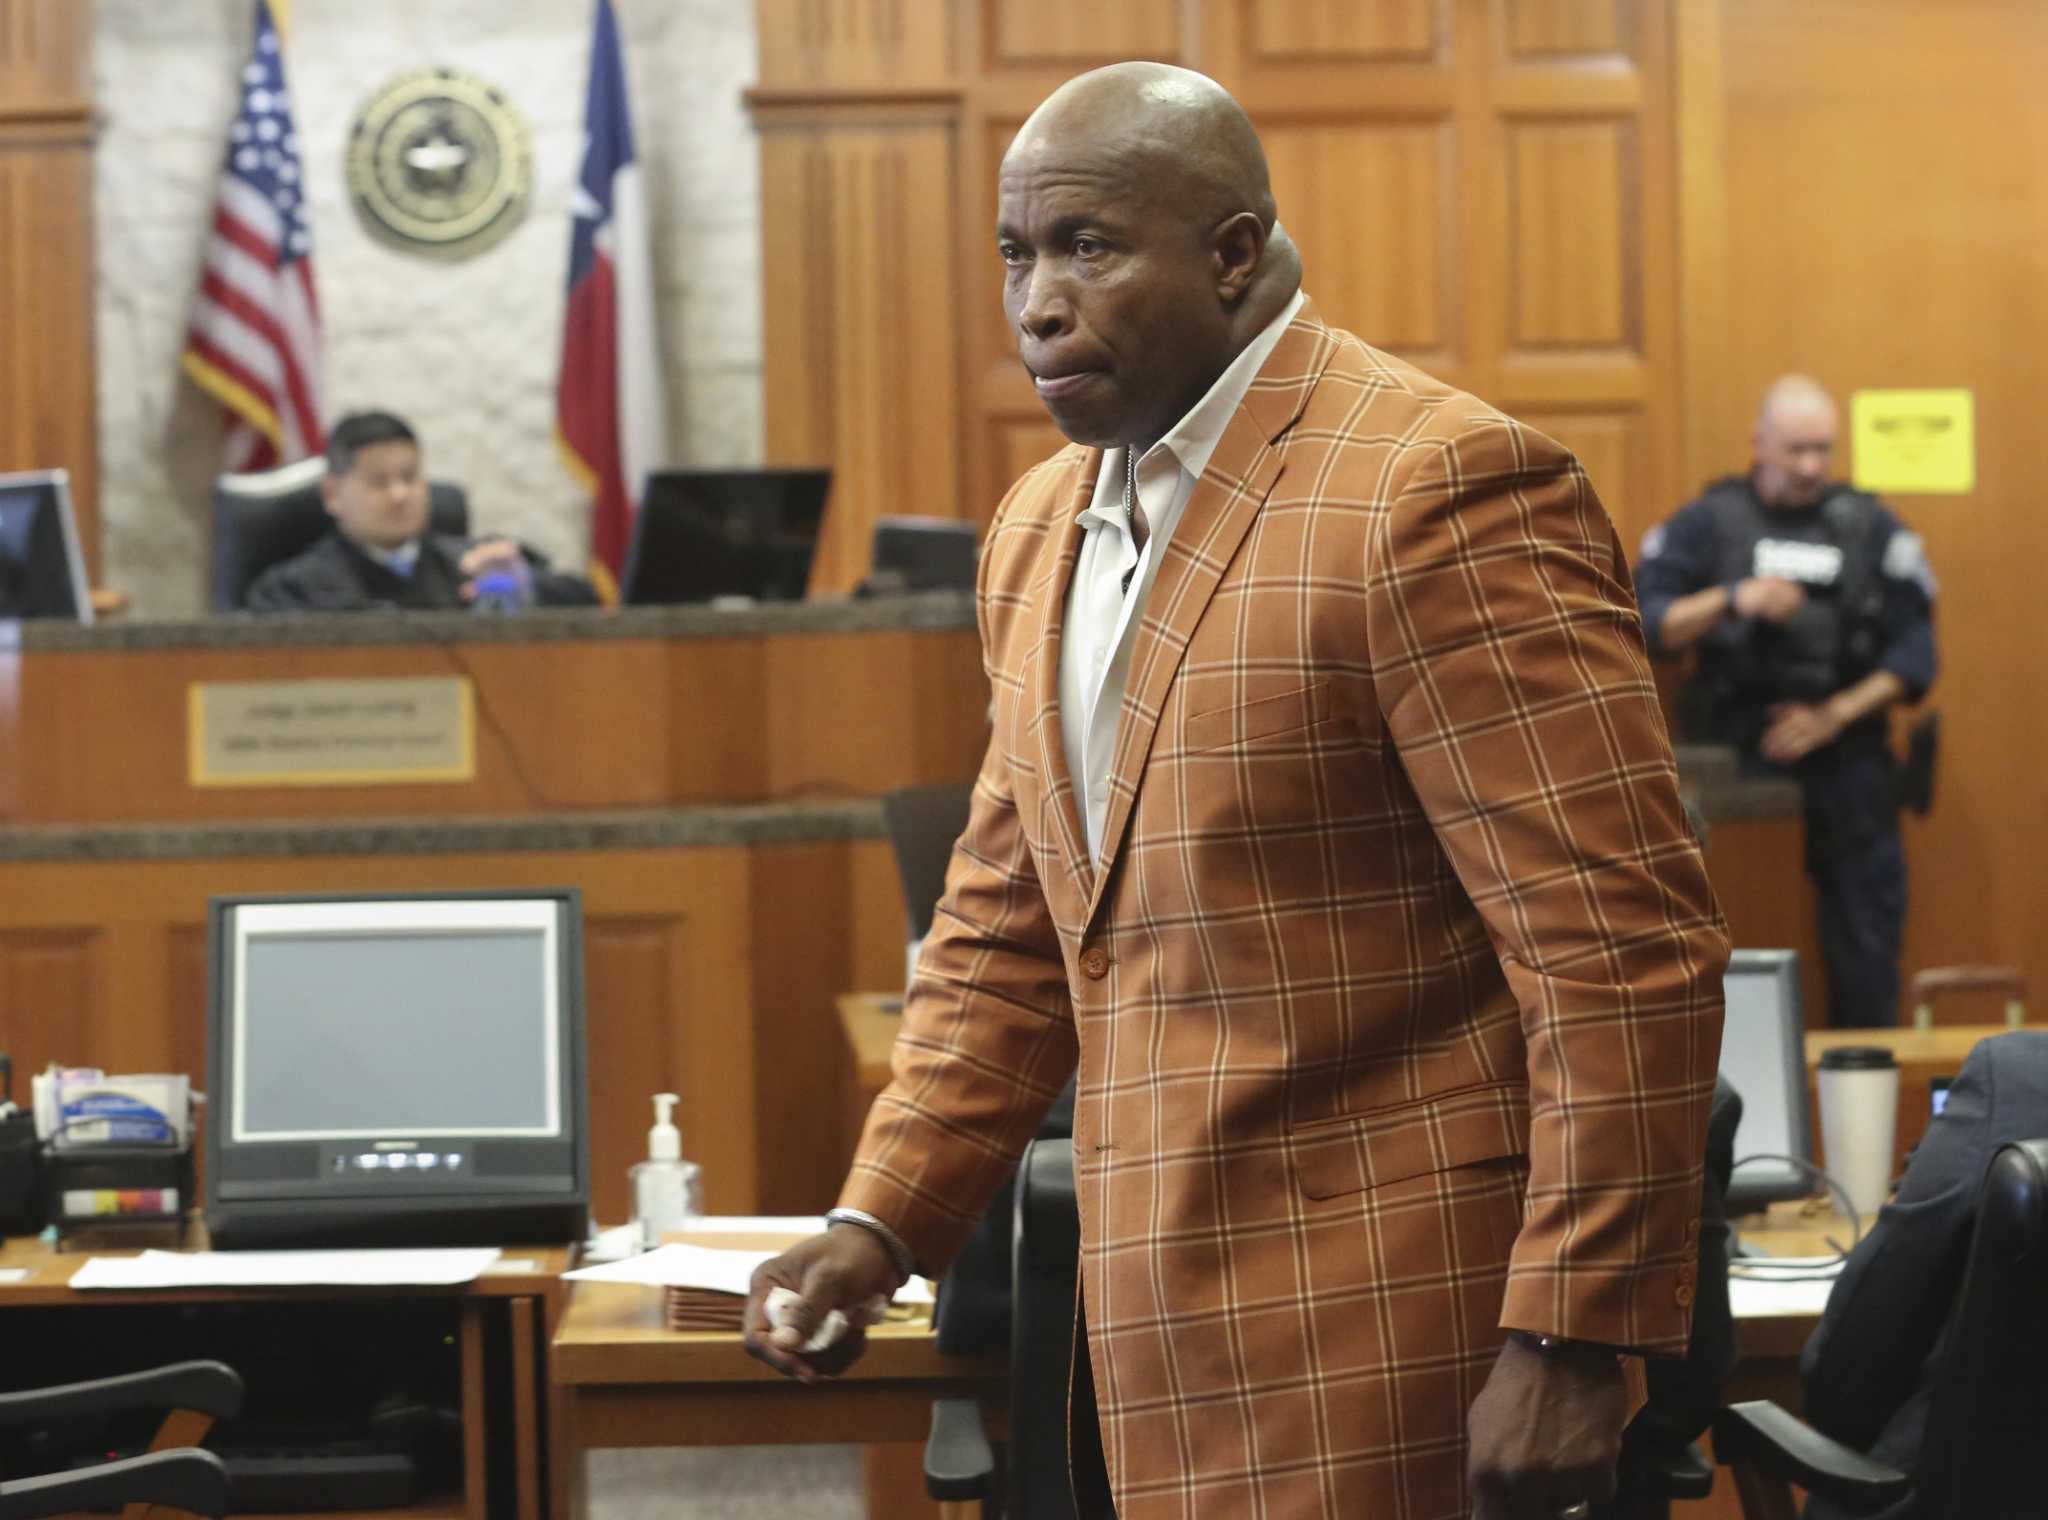 Renard Spivey in court during his trial for murder charge (Source: Houston chronicle)